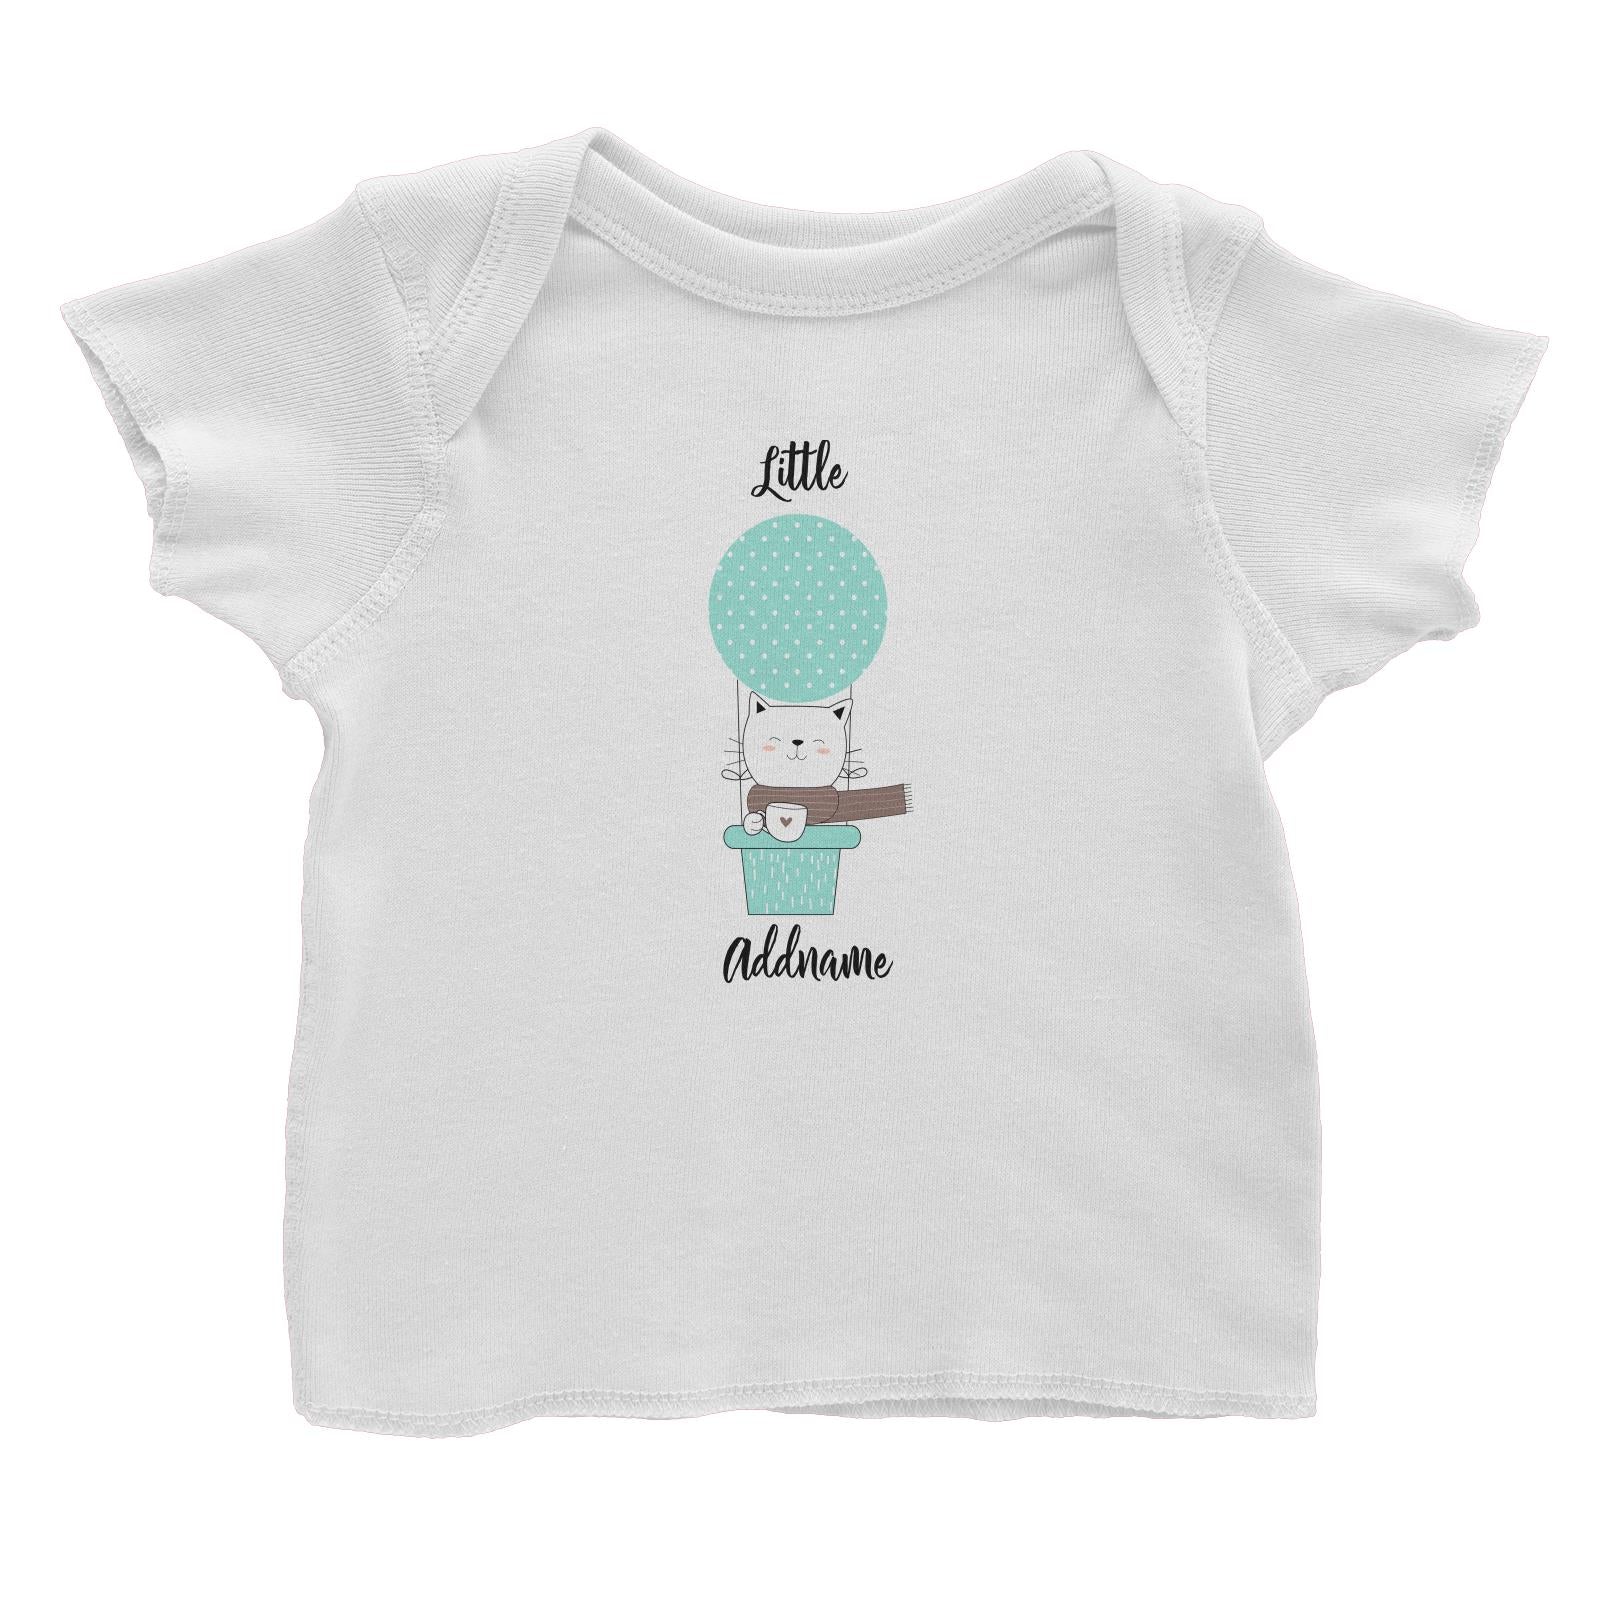 Cute Air Balloon with White Cat and Coffee Cup Addname Baby T-Shirt